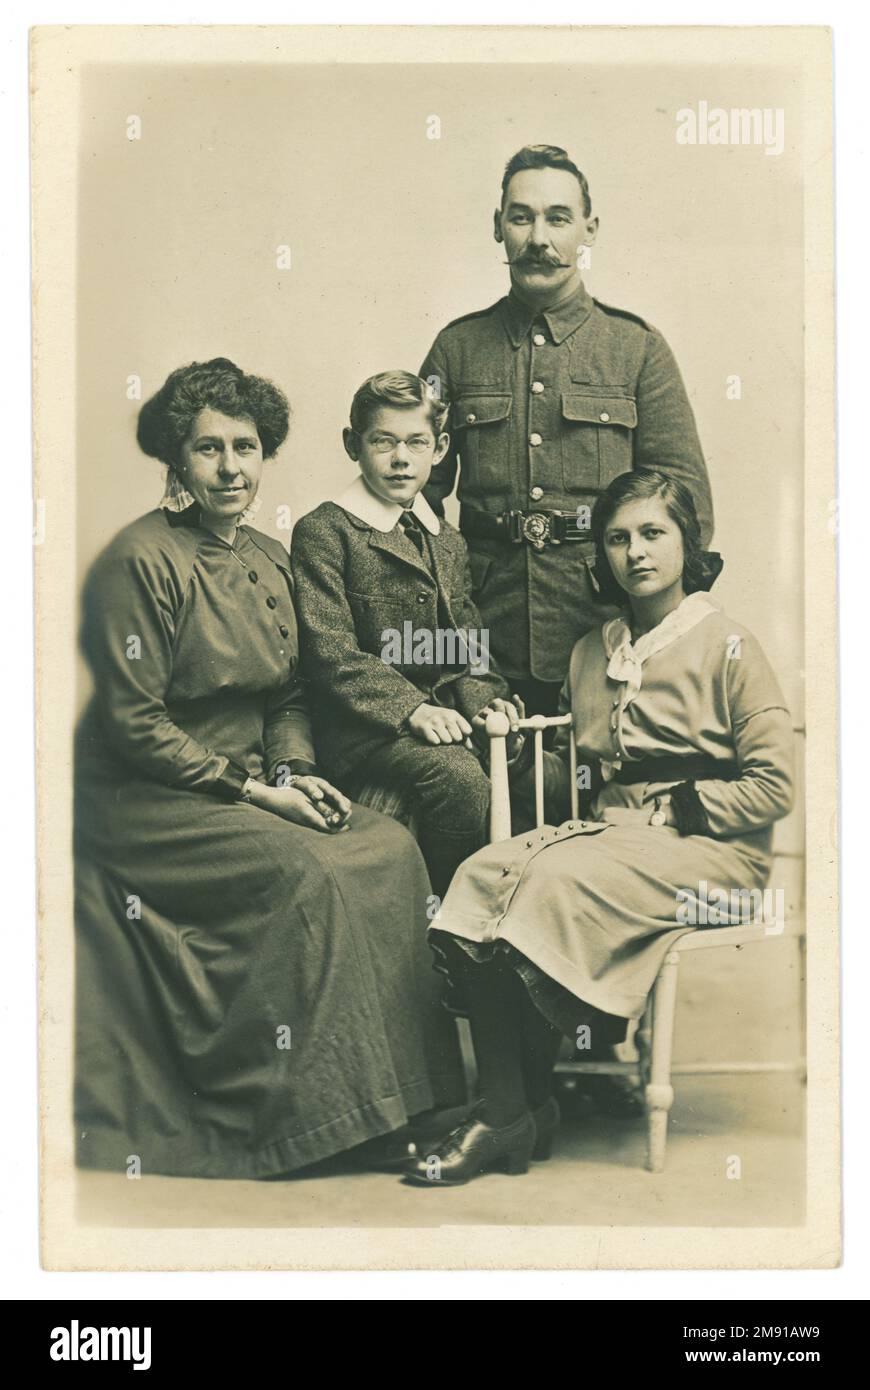 Original WW1 era studio portrait postcard family group posing for a photograph together. The children sit with their mother and father. The girl is of teenage years. All our in their Sunday best clothes. The father is in uniform and is possibly a Royal Marines Light Infantryman as indicated from his belt buckle design. Perhaps the soldier is on leave or about to go to the front. Dated Christmas 1915 on the reverse of the card, U.K. Stock Photo